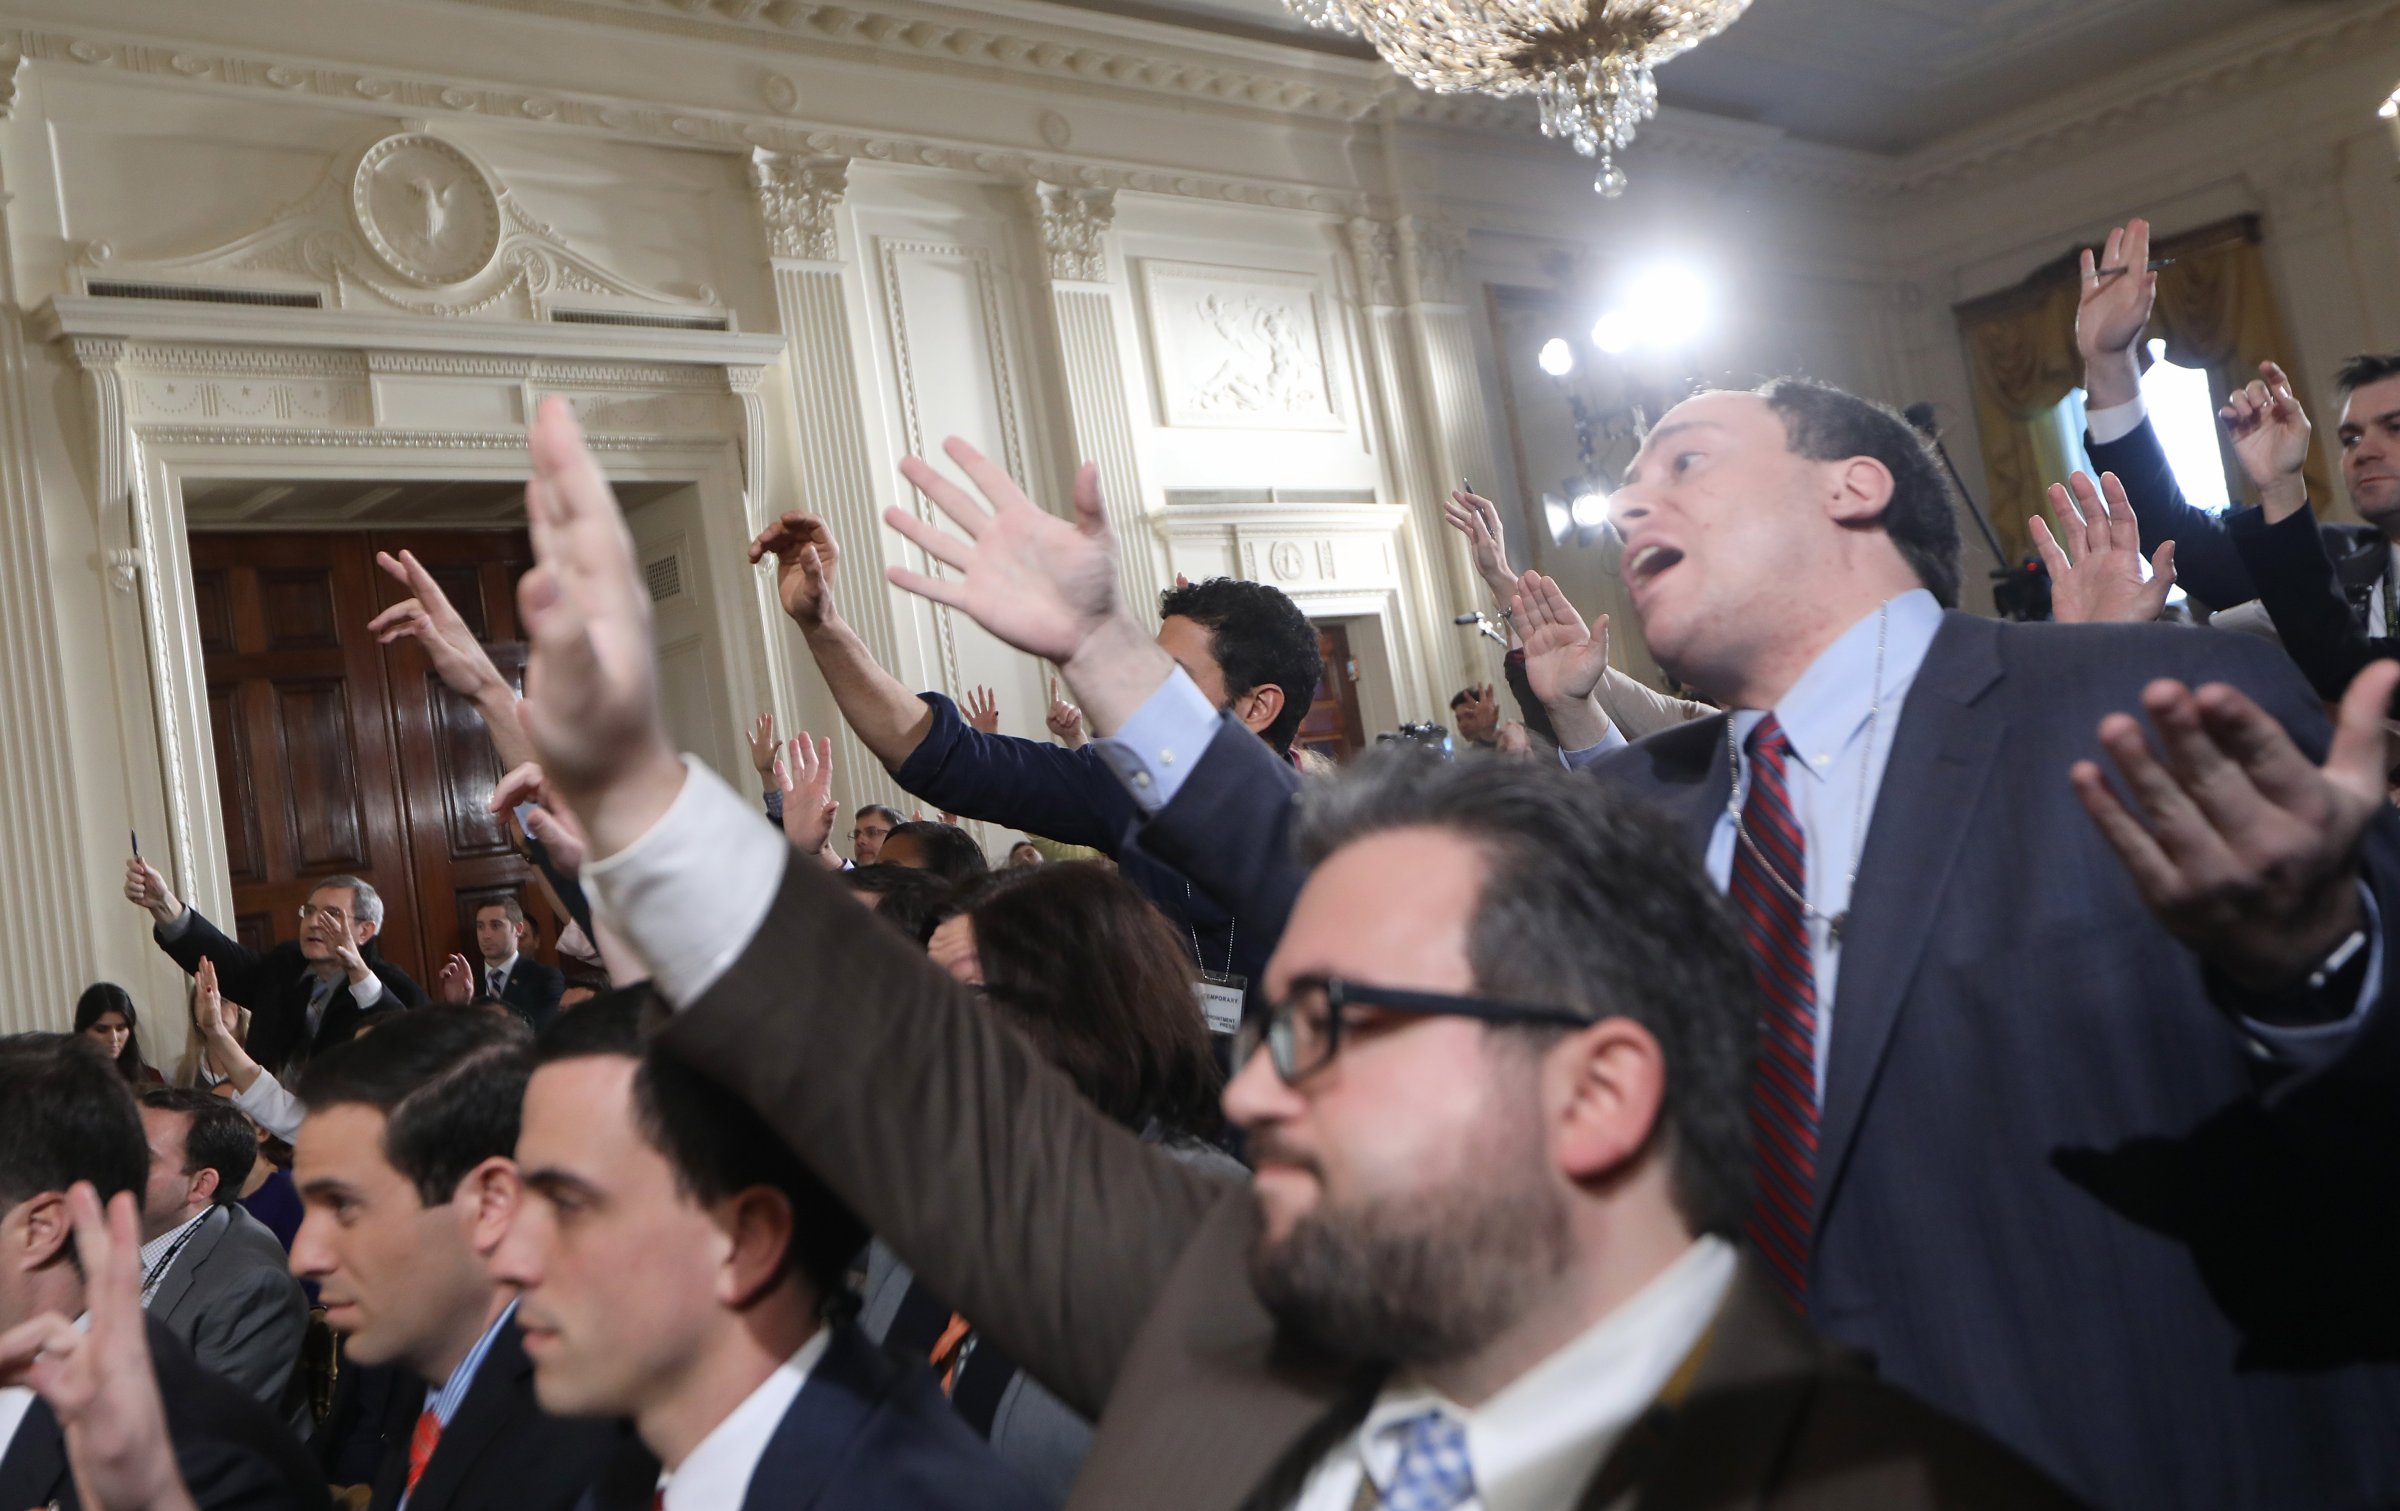 Reporters attempt to pose questions to President Donald Trump during a news conference announcing Alexander Acosta as the new Labor Secretary nominee in the East Room at the White House in Washington, on Feb. 16, 2017.